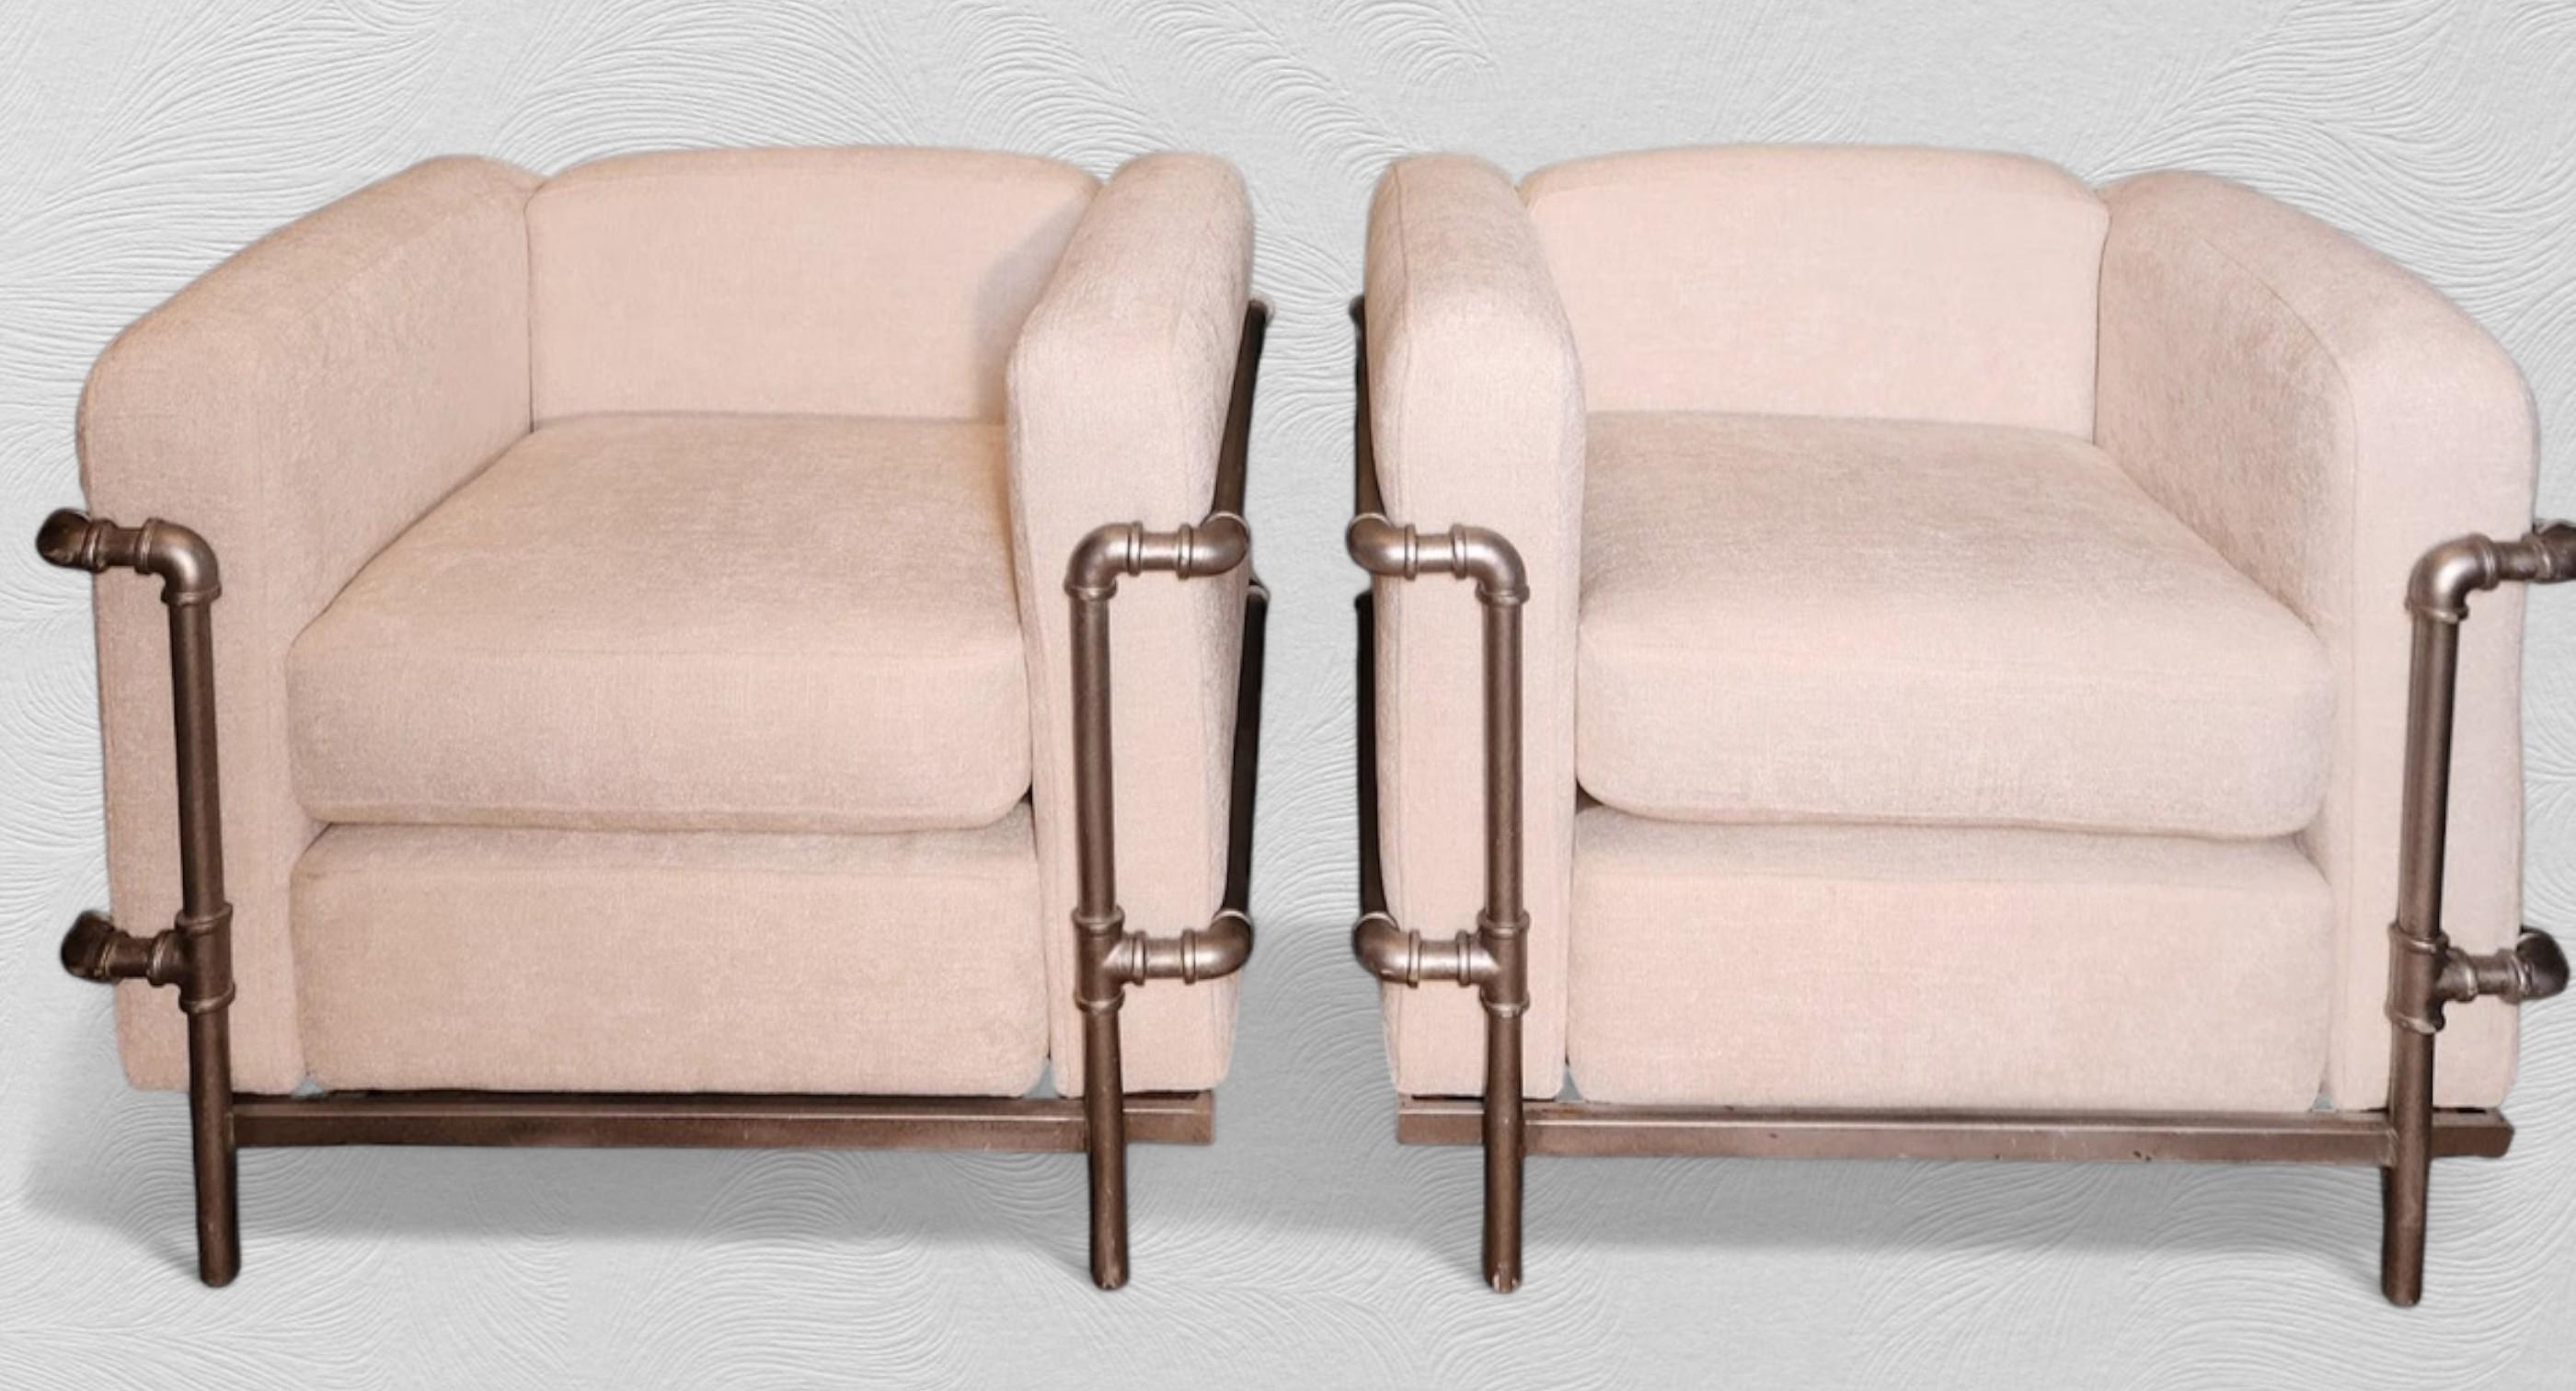 A pair of lounge chairs based on Perriand, Le Corbusier & Jeanneret iconic 1928  